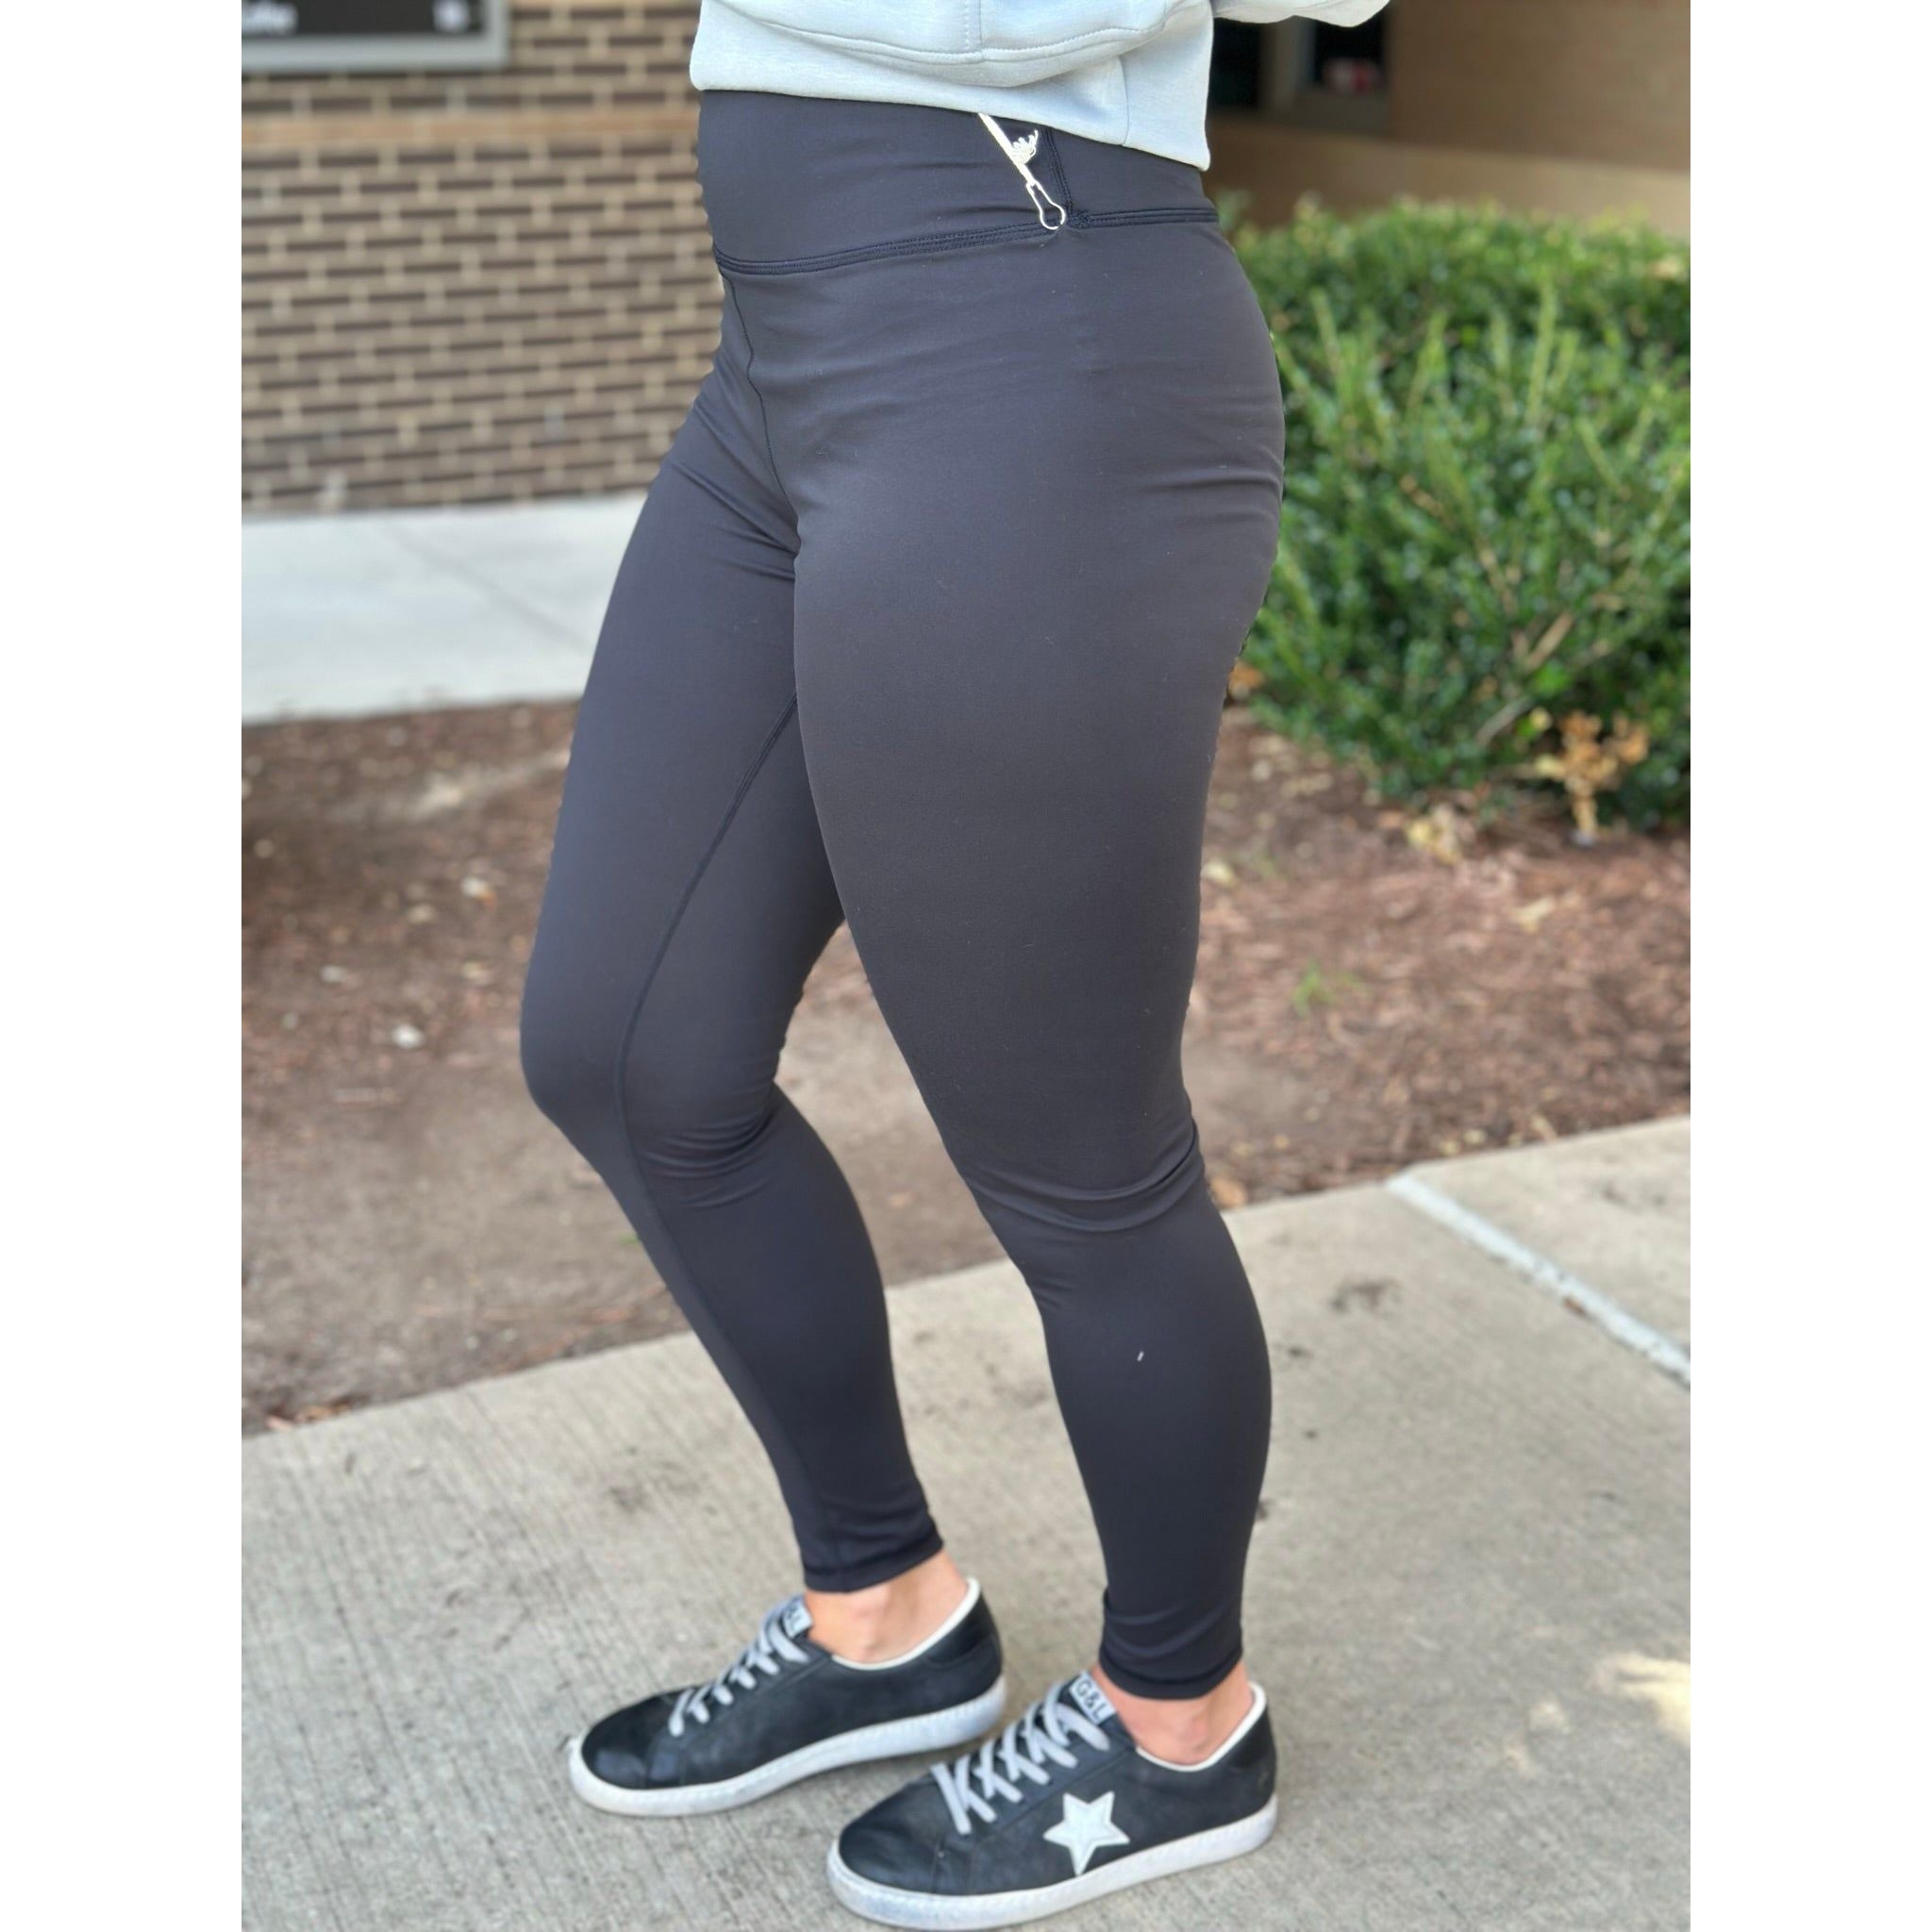 A Guide To Squat Proof Gym Leggings For Women | Lipstick Lifters